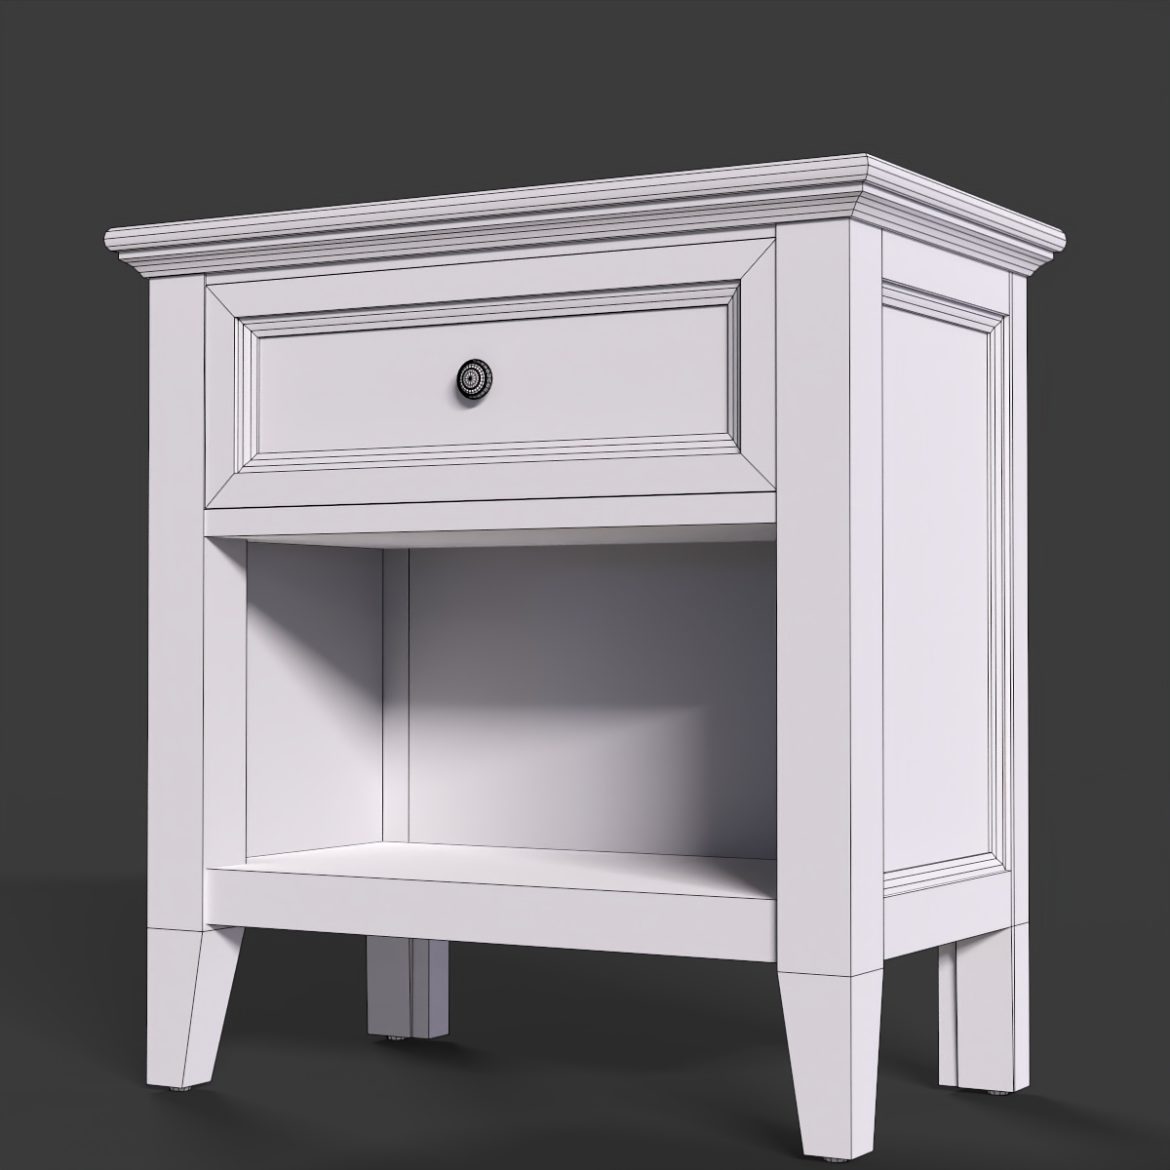  <a class="continue" href="https://www.flatpyramid.com/3d-models/furniture-3d-models/nightstand/">Continue Reading<span> NightStand</span></a>